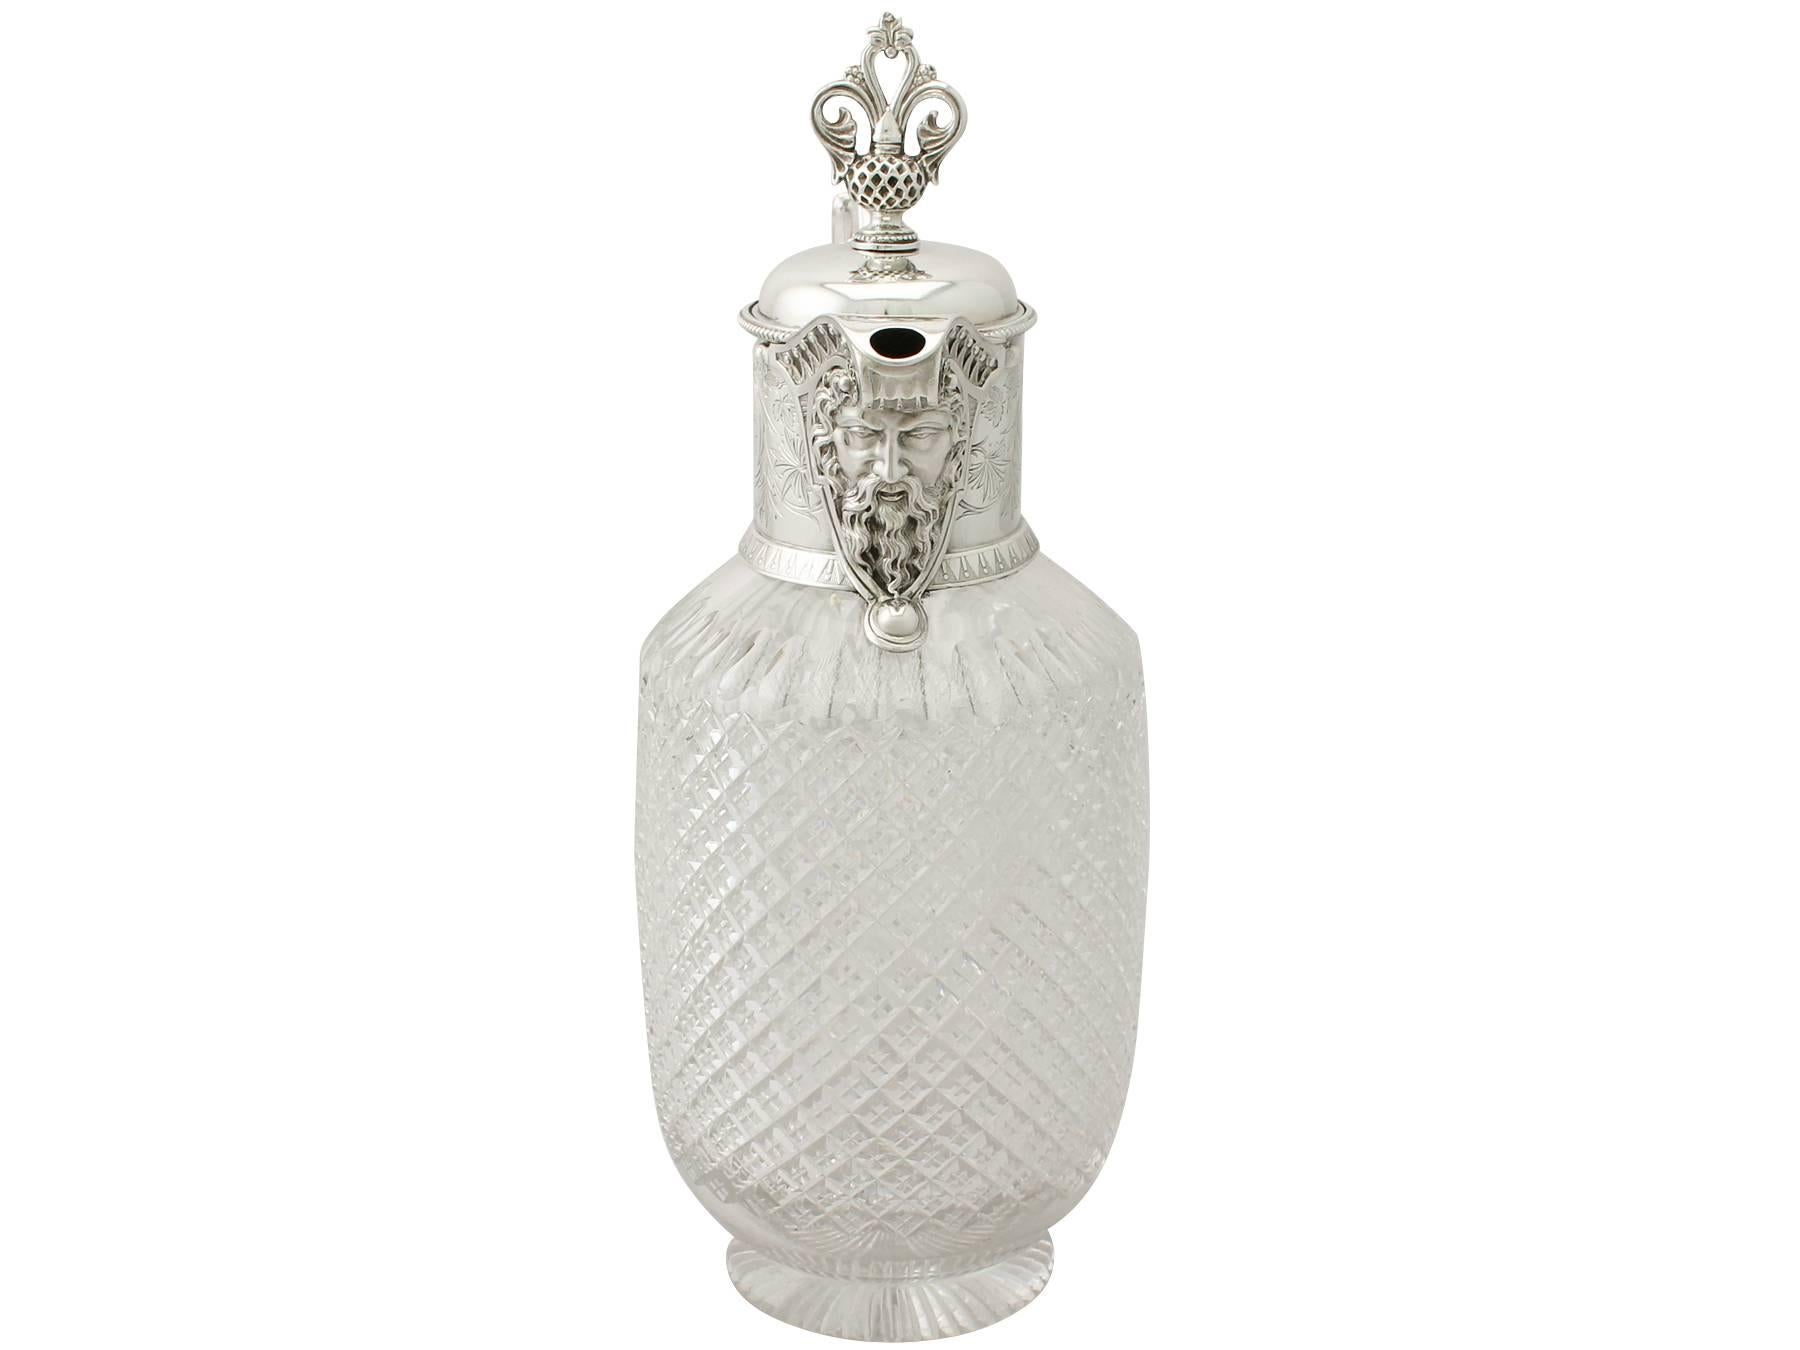 An exceptional, fine and impressive antique Victorian cut-glass and English sterling silver-mounted claret jug; an addition to our wine and drink related silverware collection.

This exceptional antique Victorian English sterling silver and